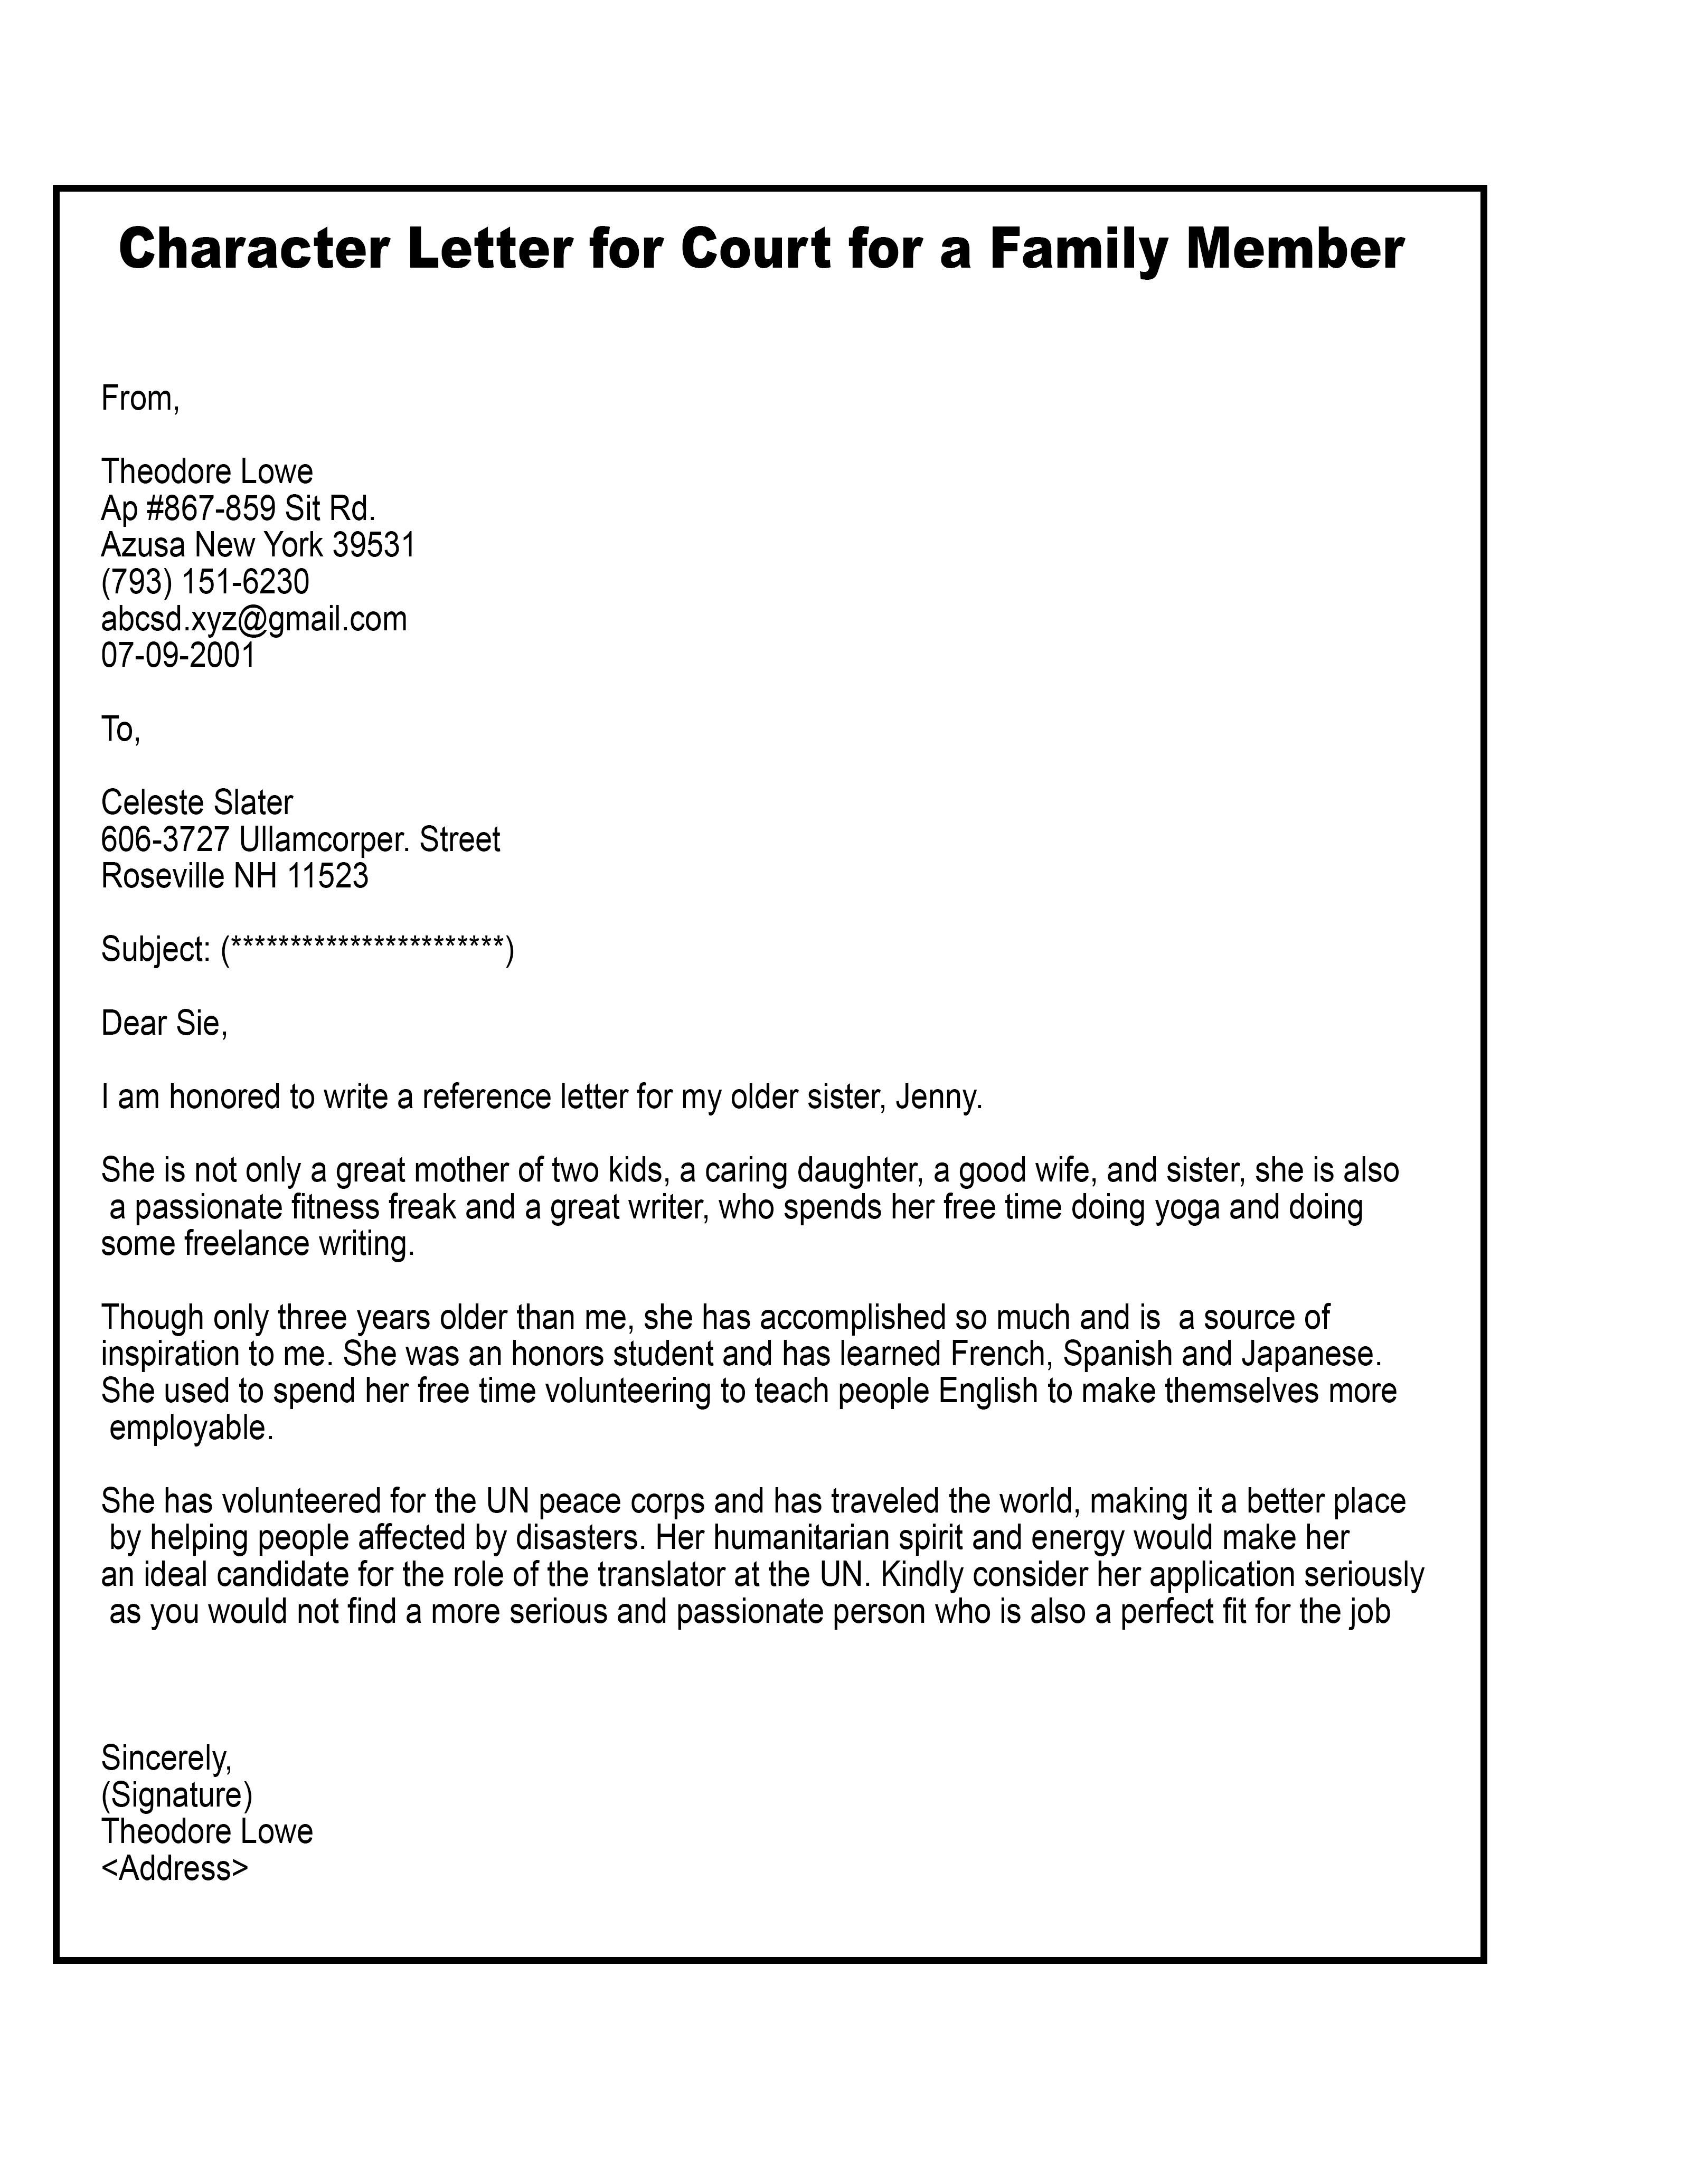 Character Letter for Court for a Family Member (2)